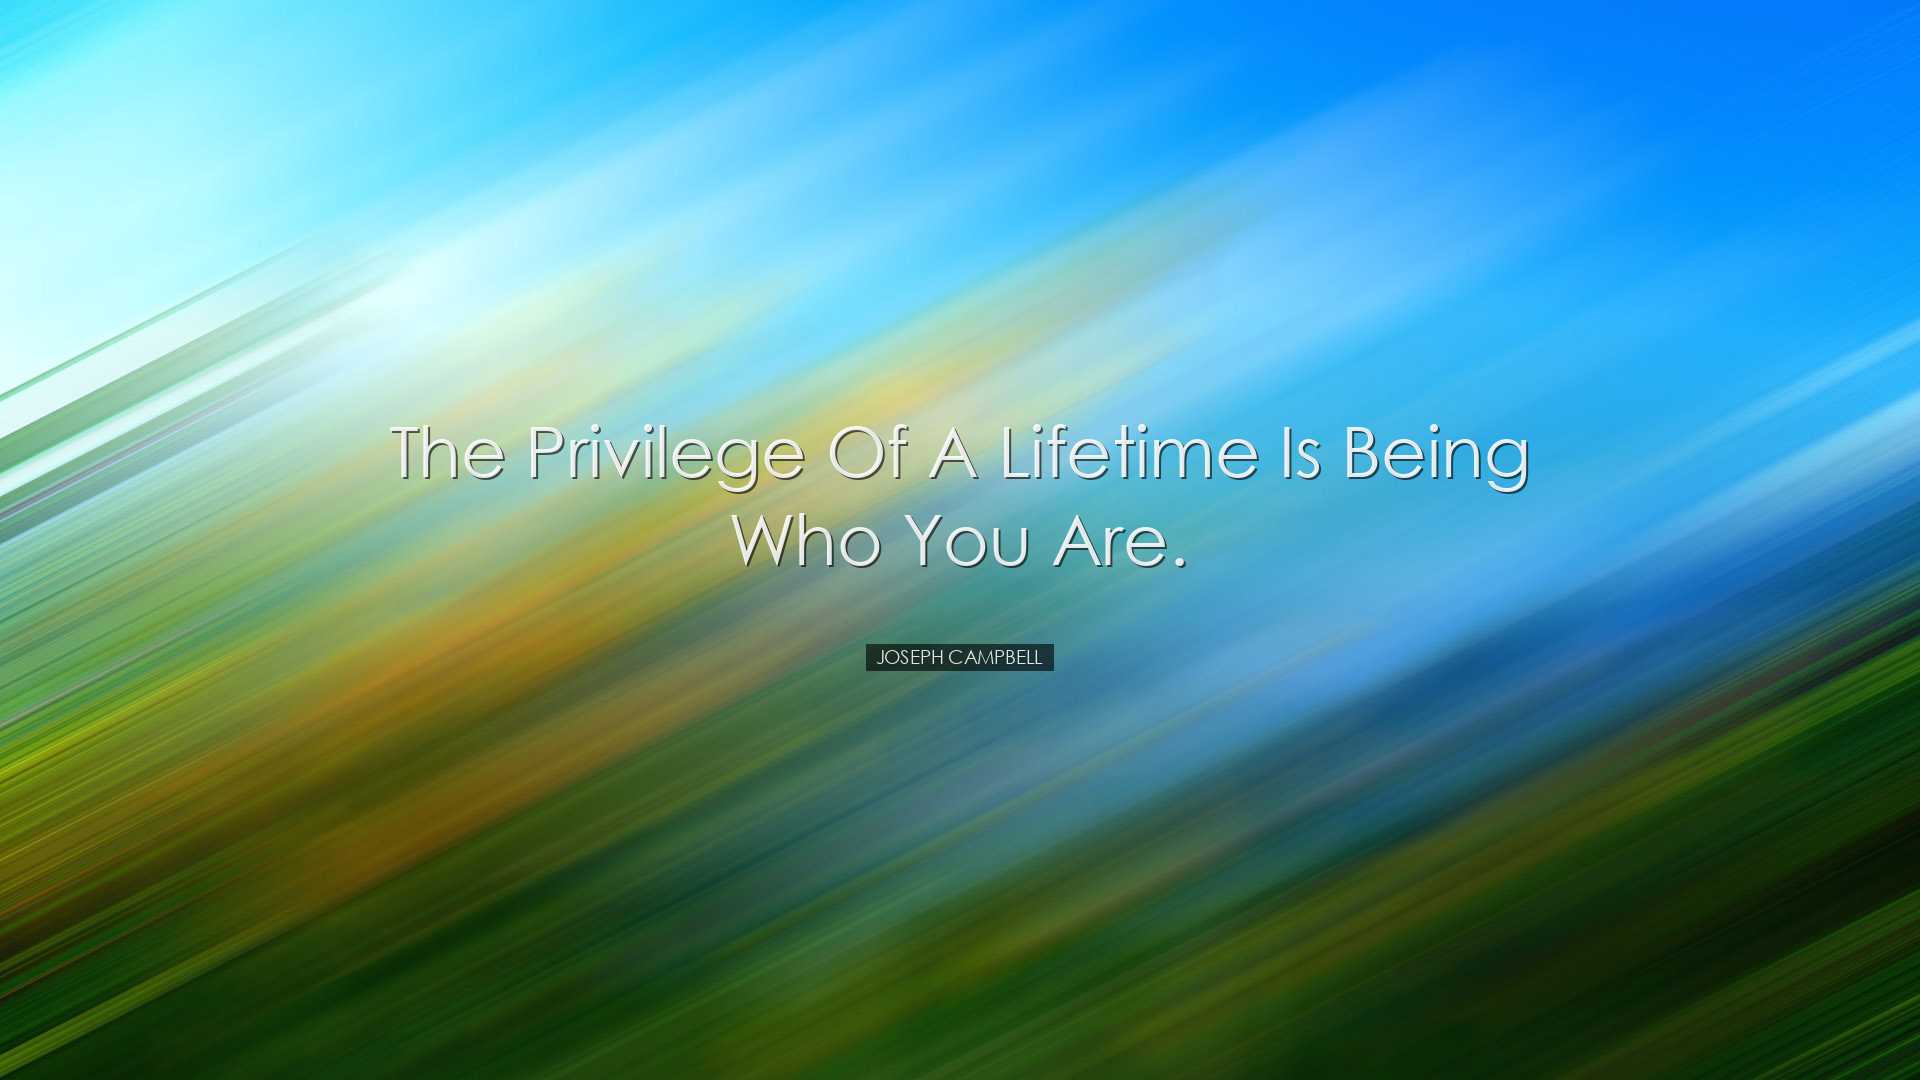 The privilege of a lifetime is being who you are. - Joseph Campbel